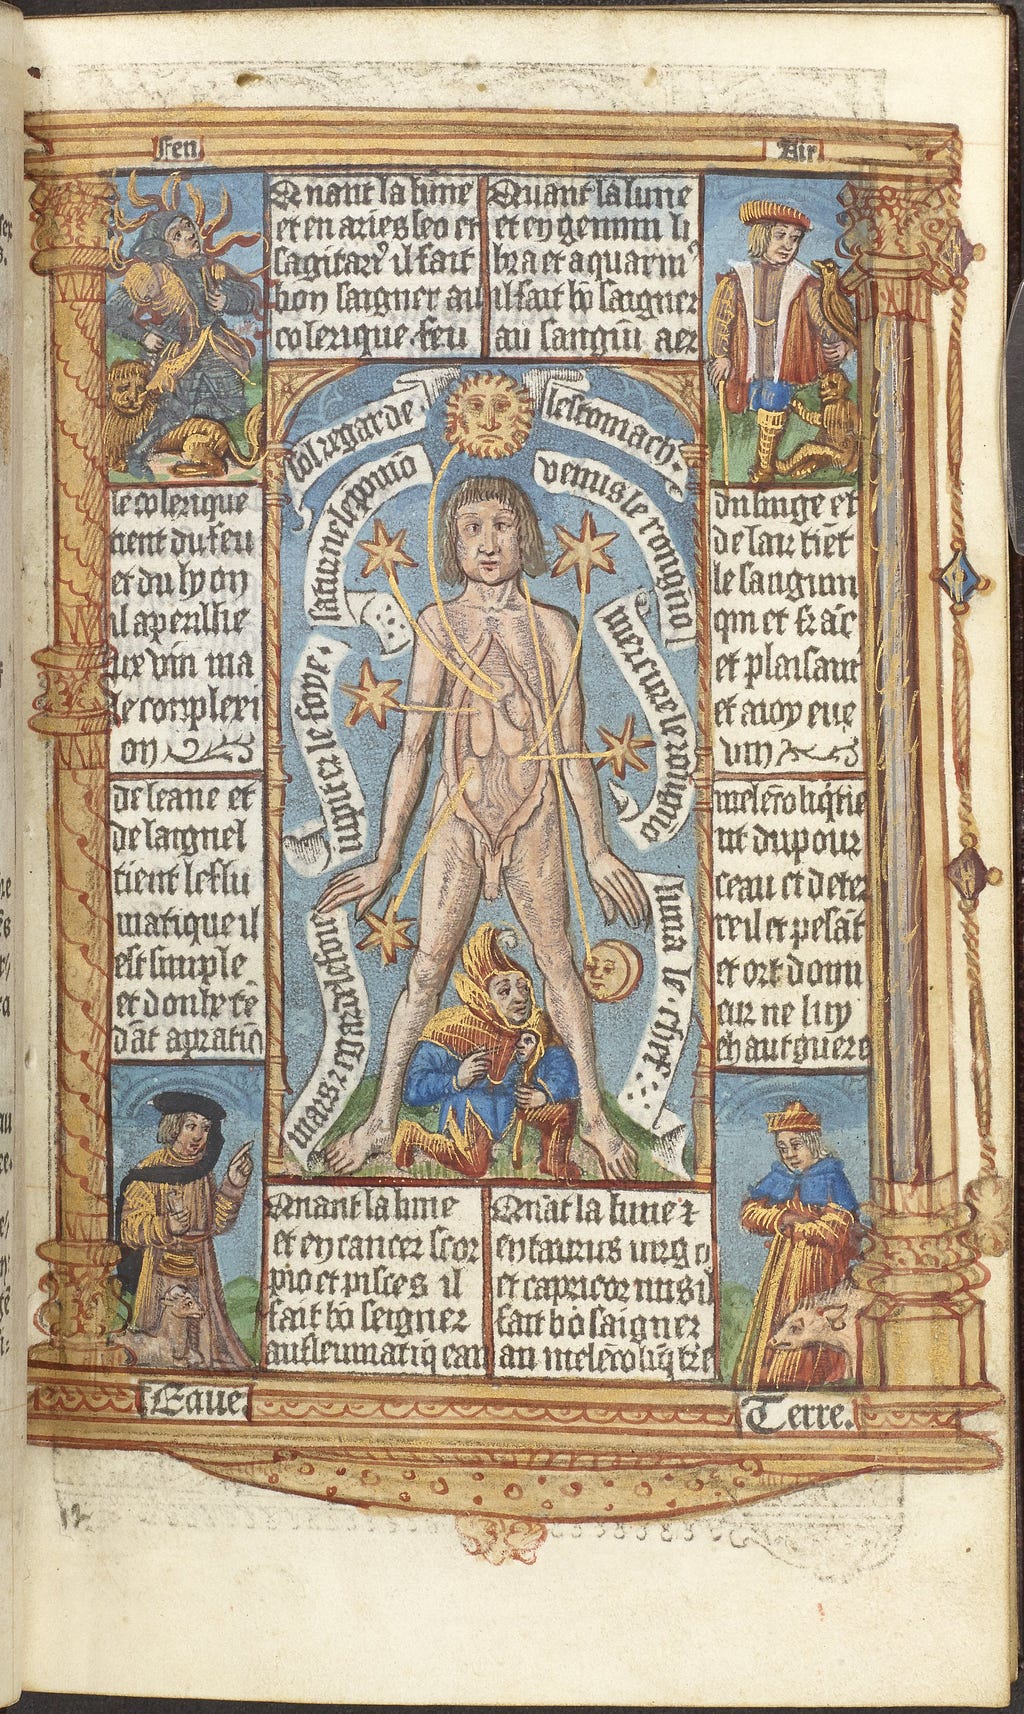 Manuscript illustration of a man with astrological elements linked to his body